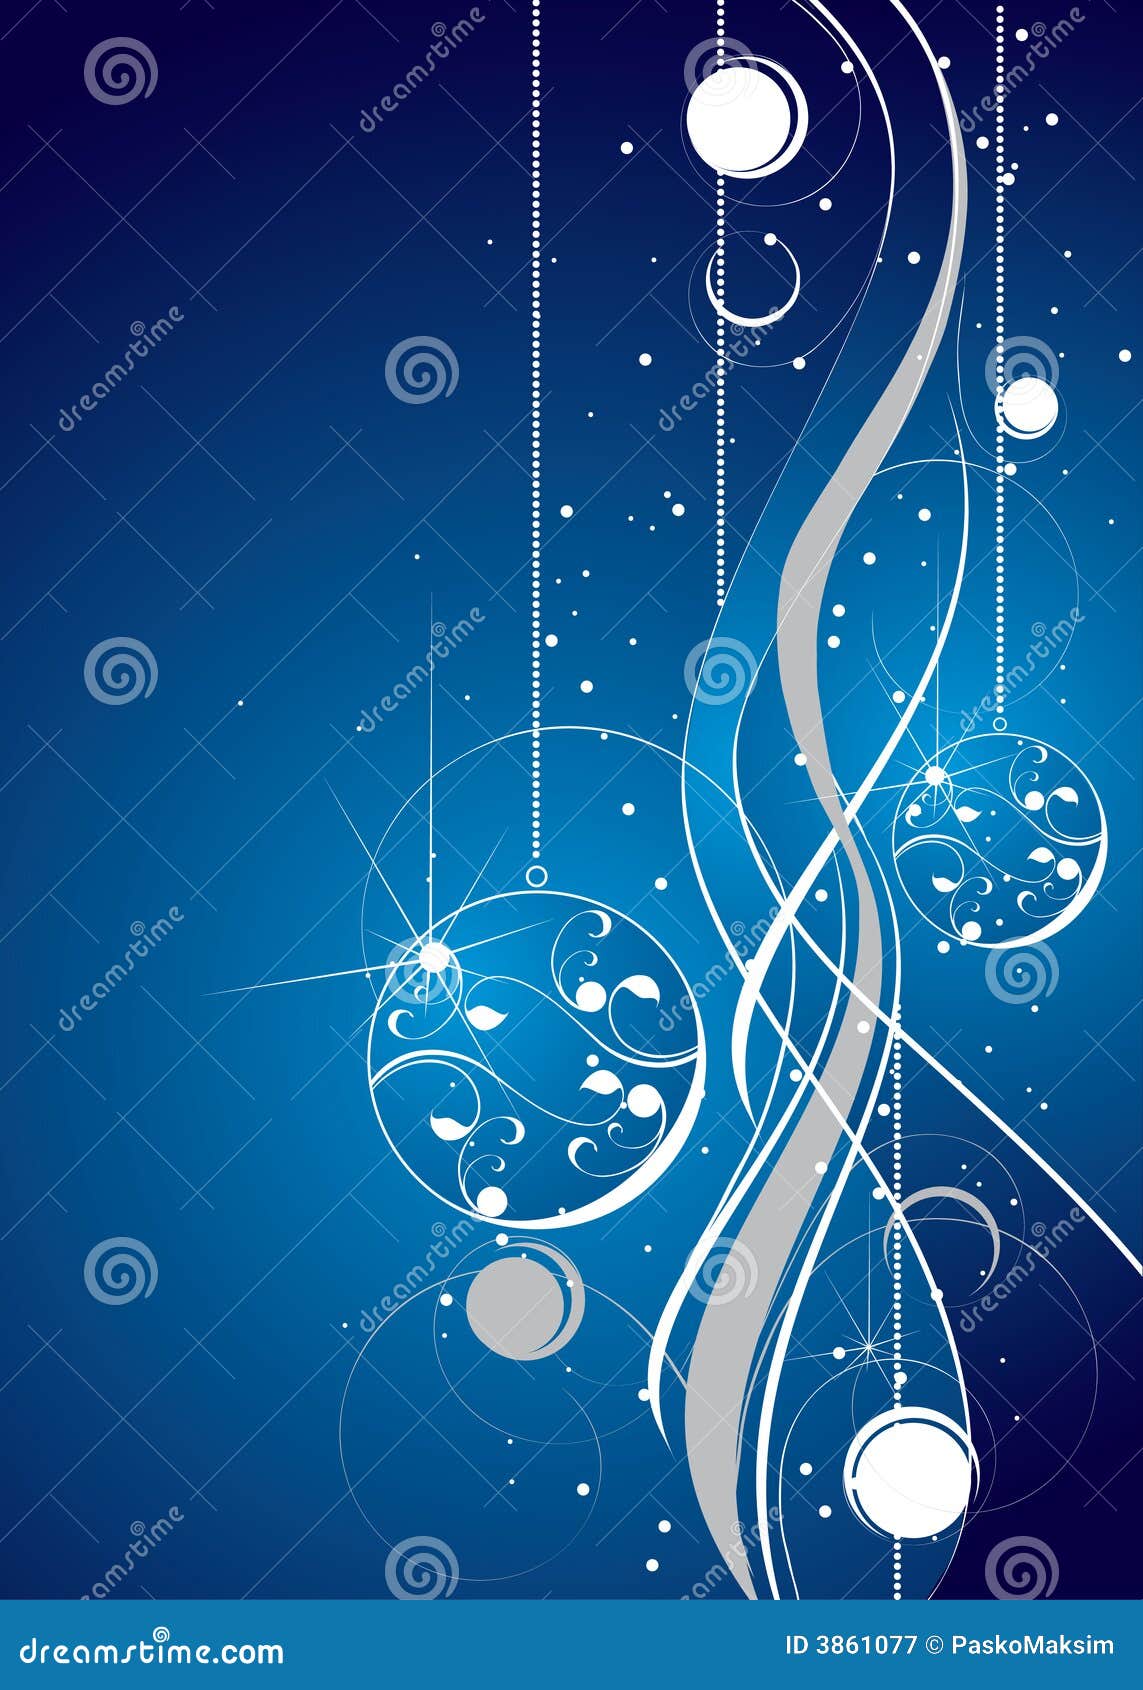 Blue And White Artistic Design Royalty Free Stock 